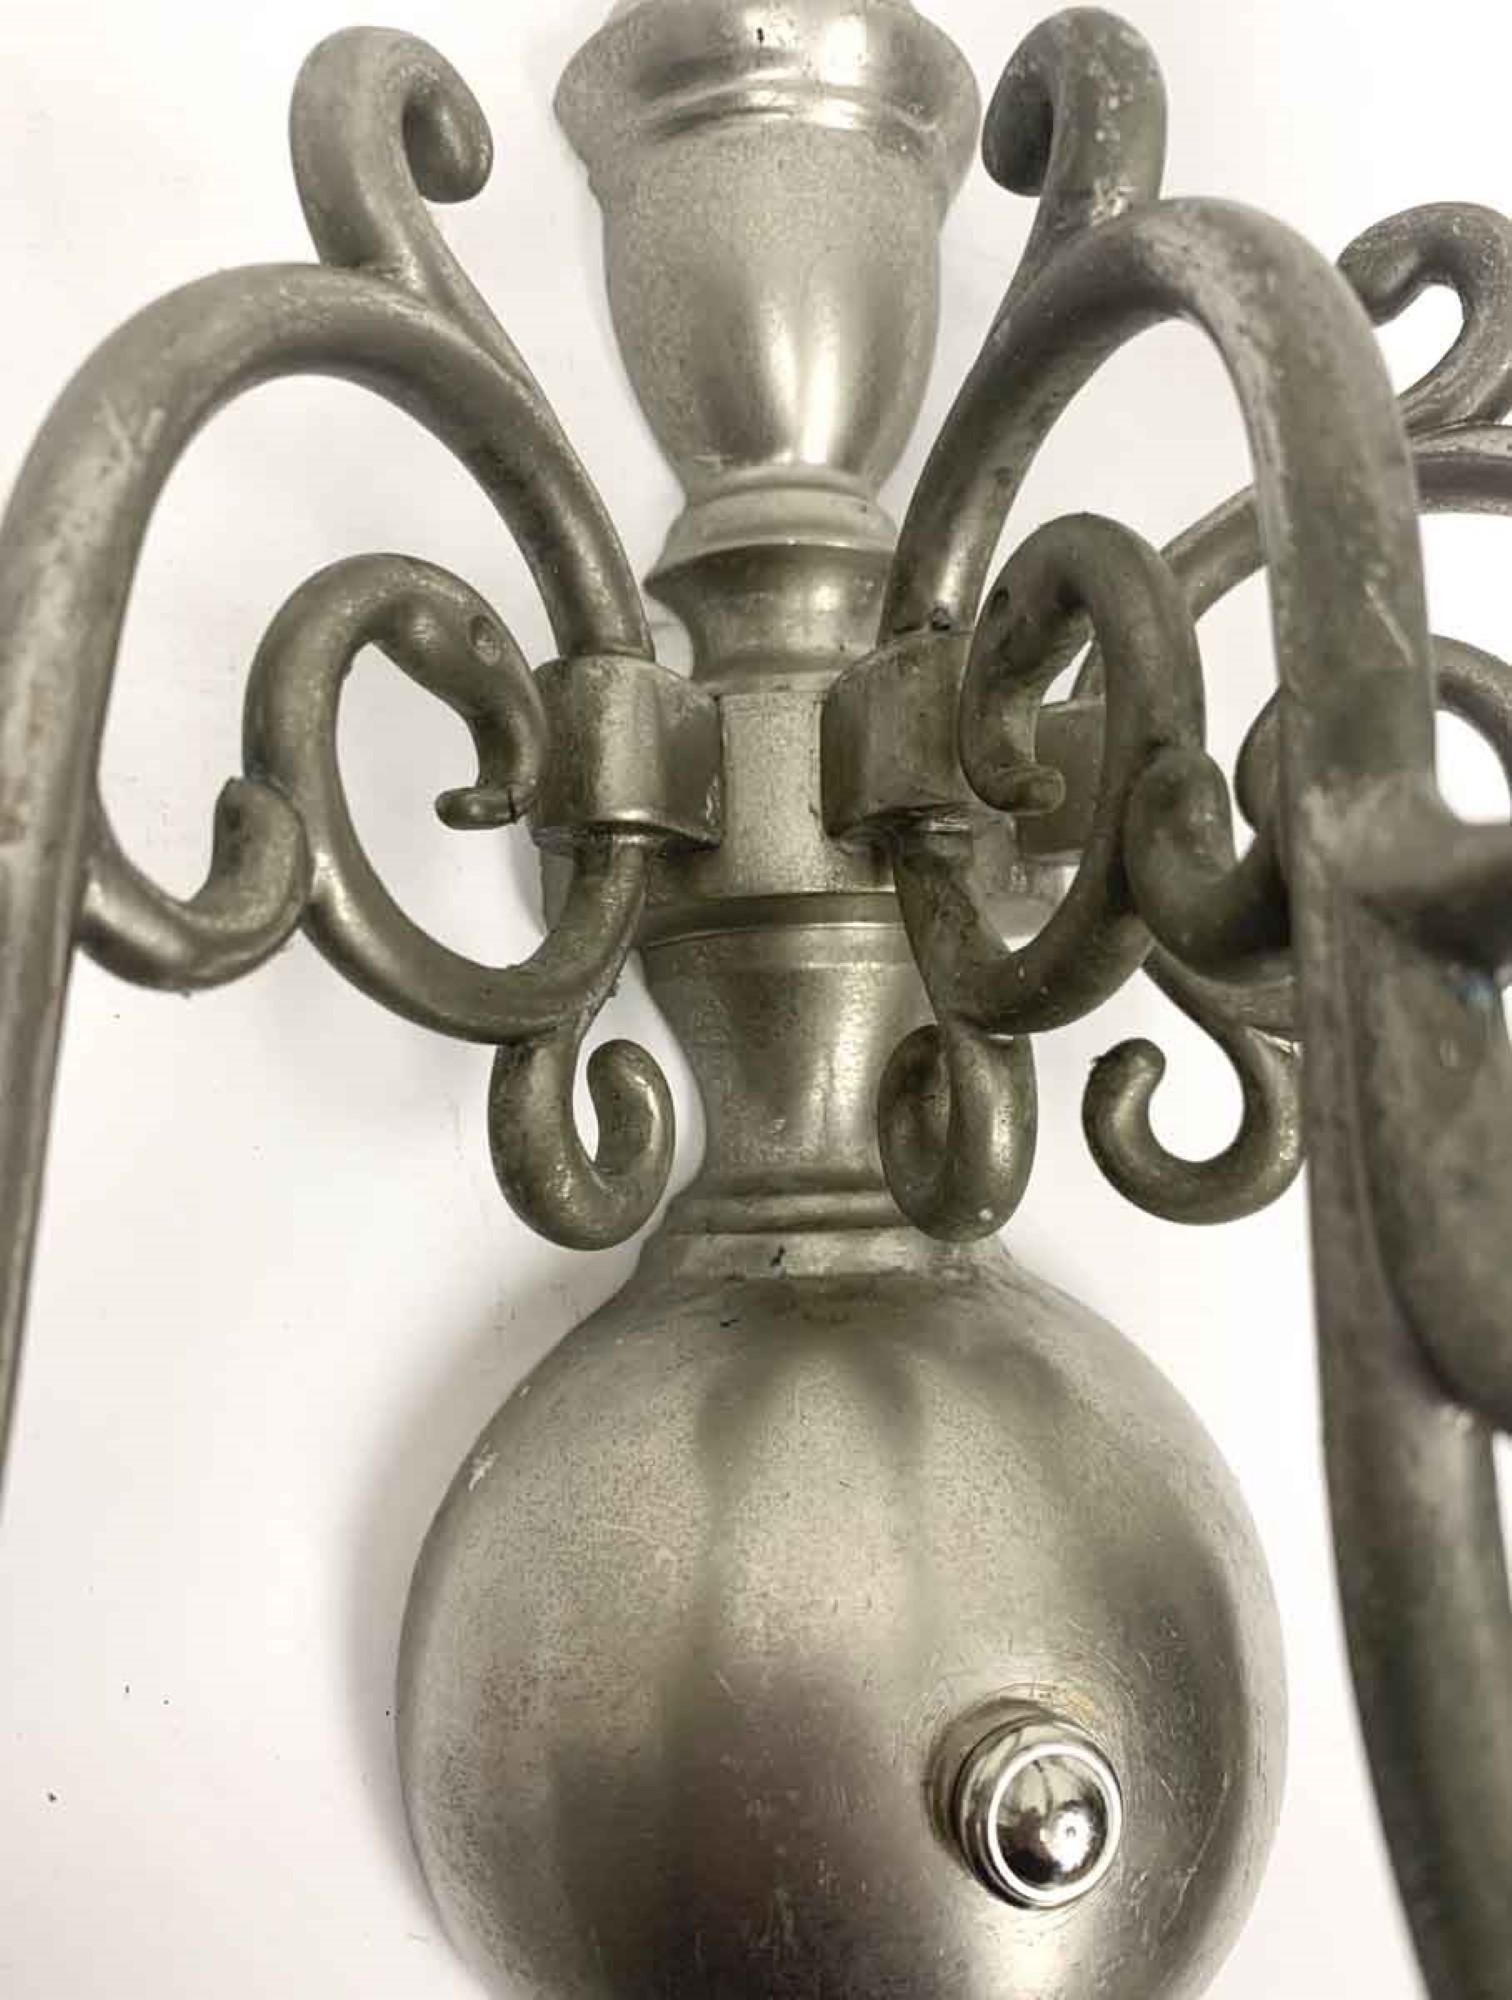 Williamsburg style brass three arm sconce with a silver finish. Cleaned and rewired. Small quantity available at time of posting. Please inquire. Priced each. Please note, this item is located in our Scranton, PA location.